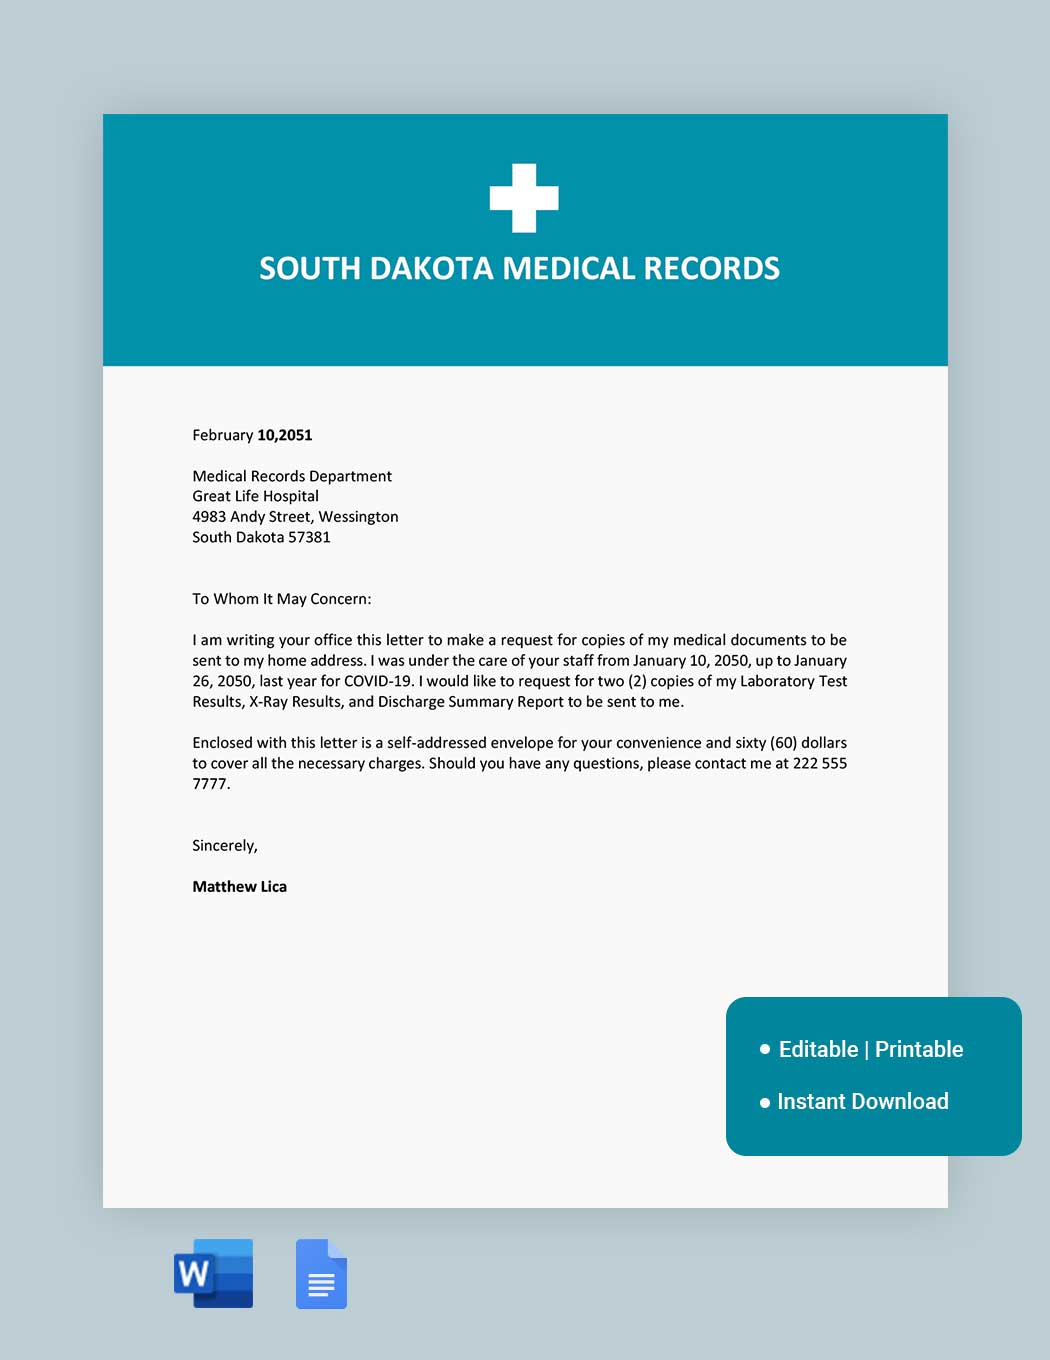 South Dakota Medical Records Request Template in Word, Google Docs